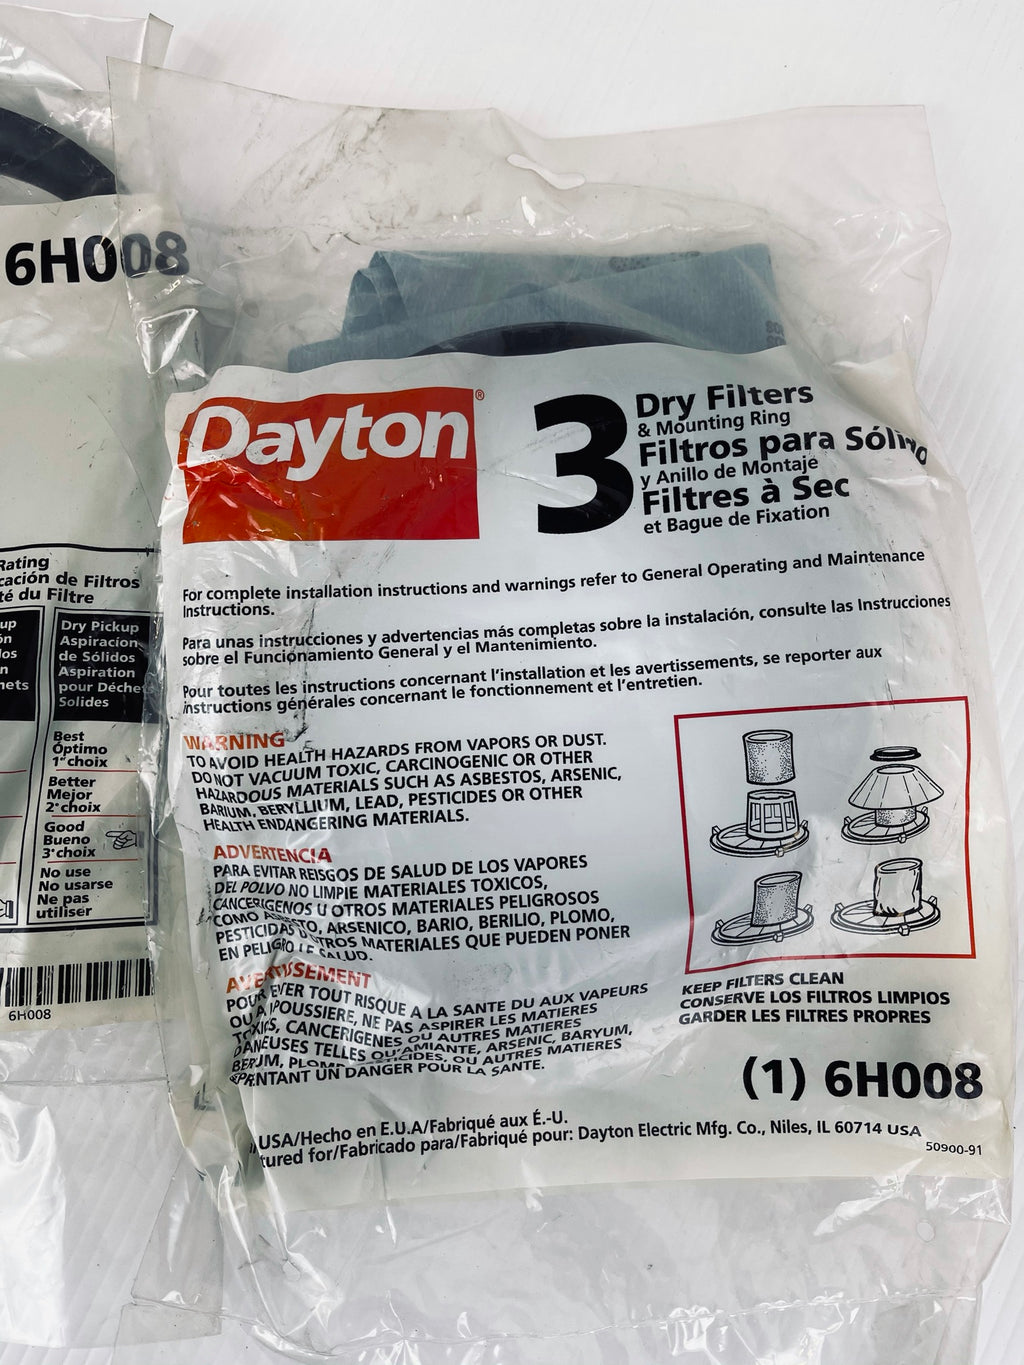 NEW IN FACTORY BAG * DAYTON 3 DRY FILTERS 6H008 